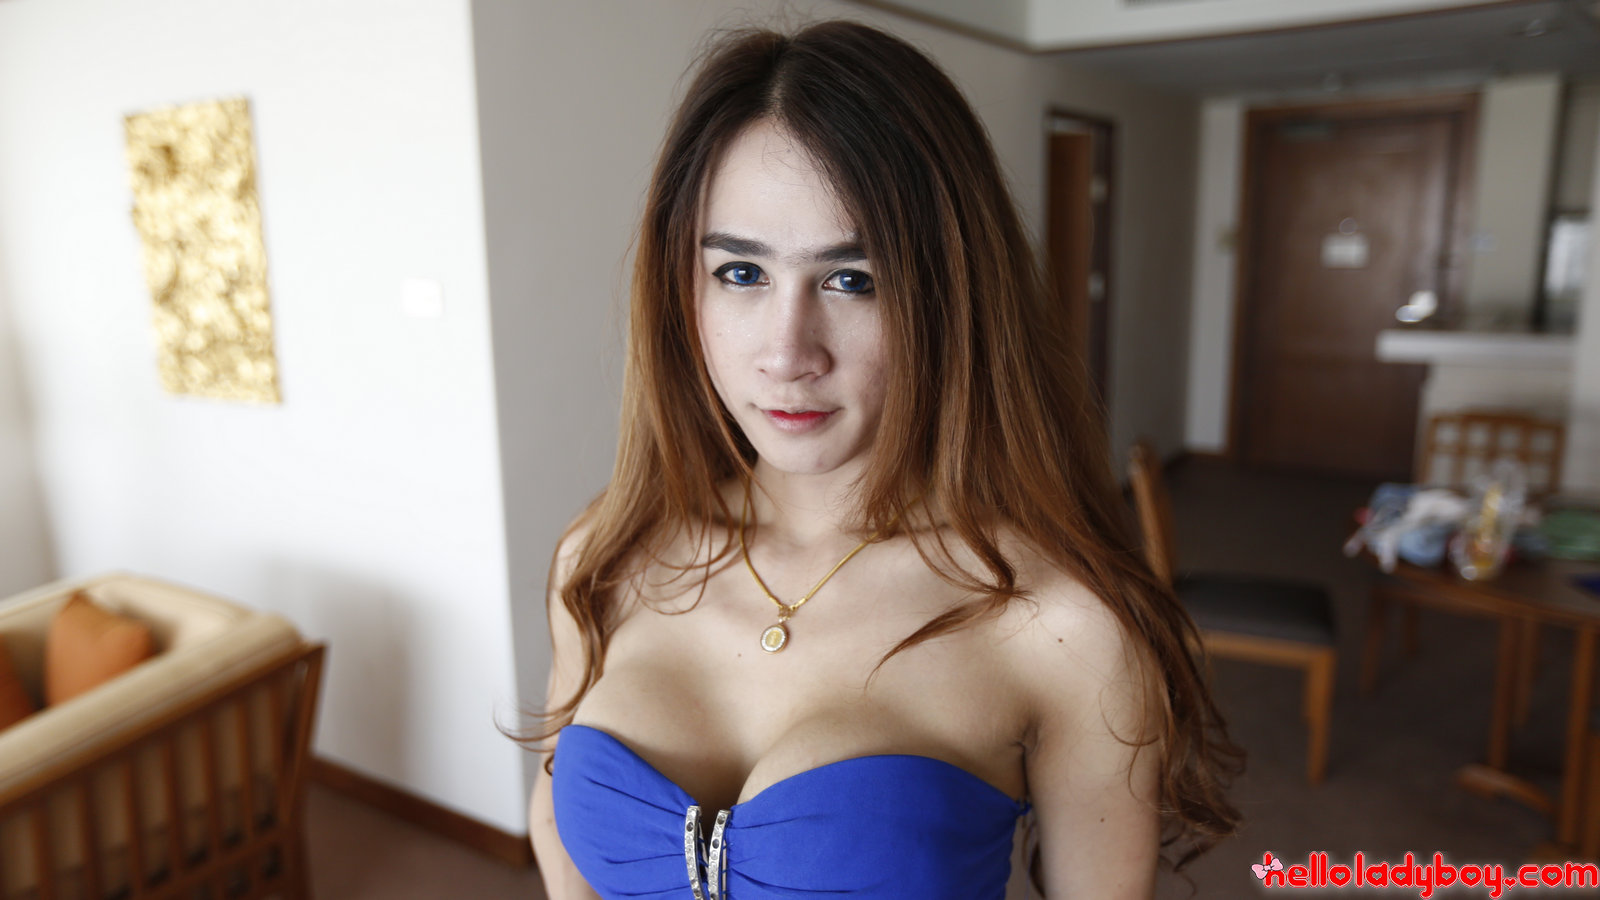 1600px x 900px - Thai ladyboy with big fake tits and long hair gets facial from tourist